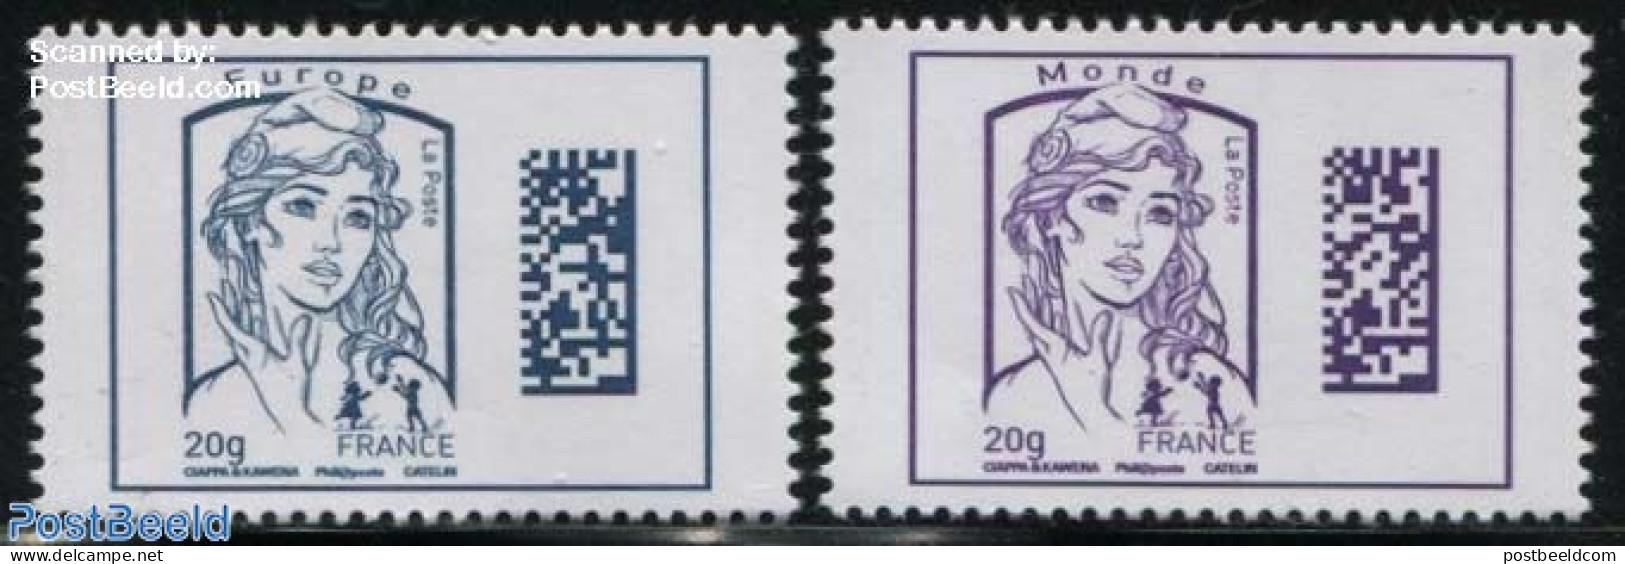 France 2015 Definitives With Barcode And Playing Kids 2v, Mint NH - Nuovi